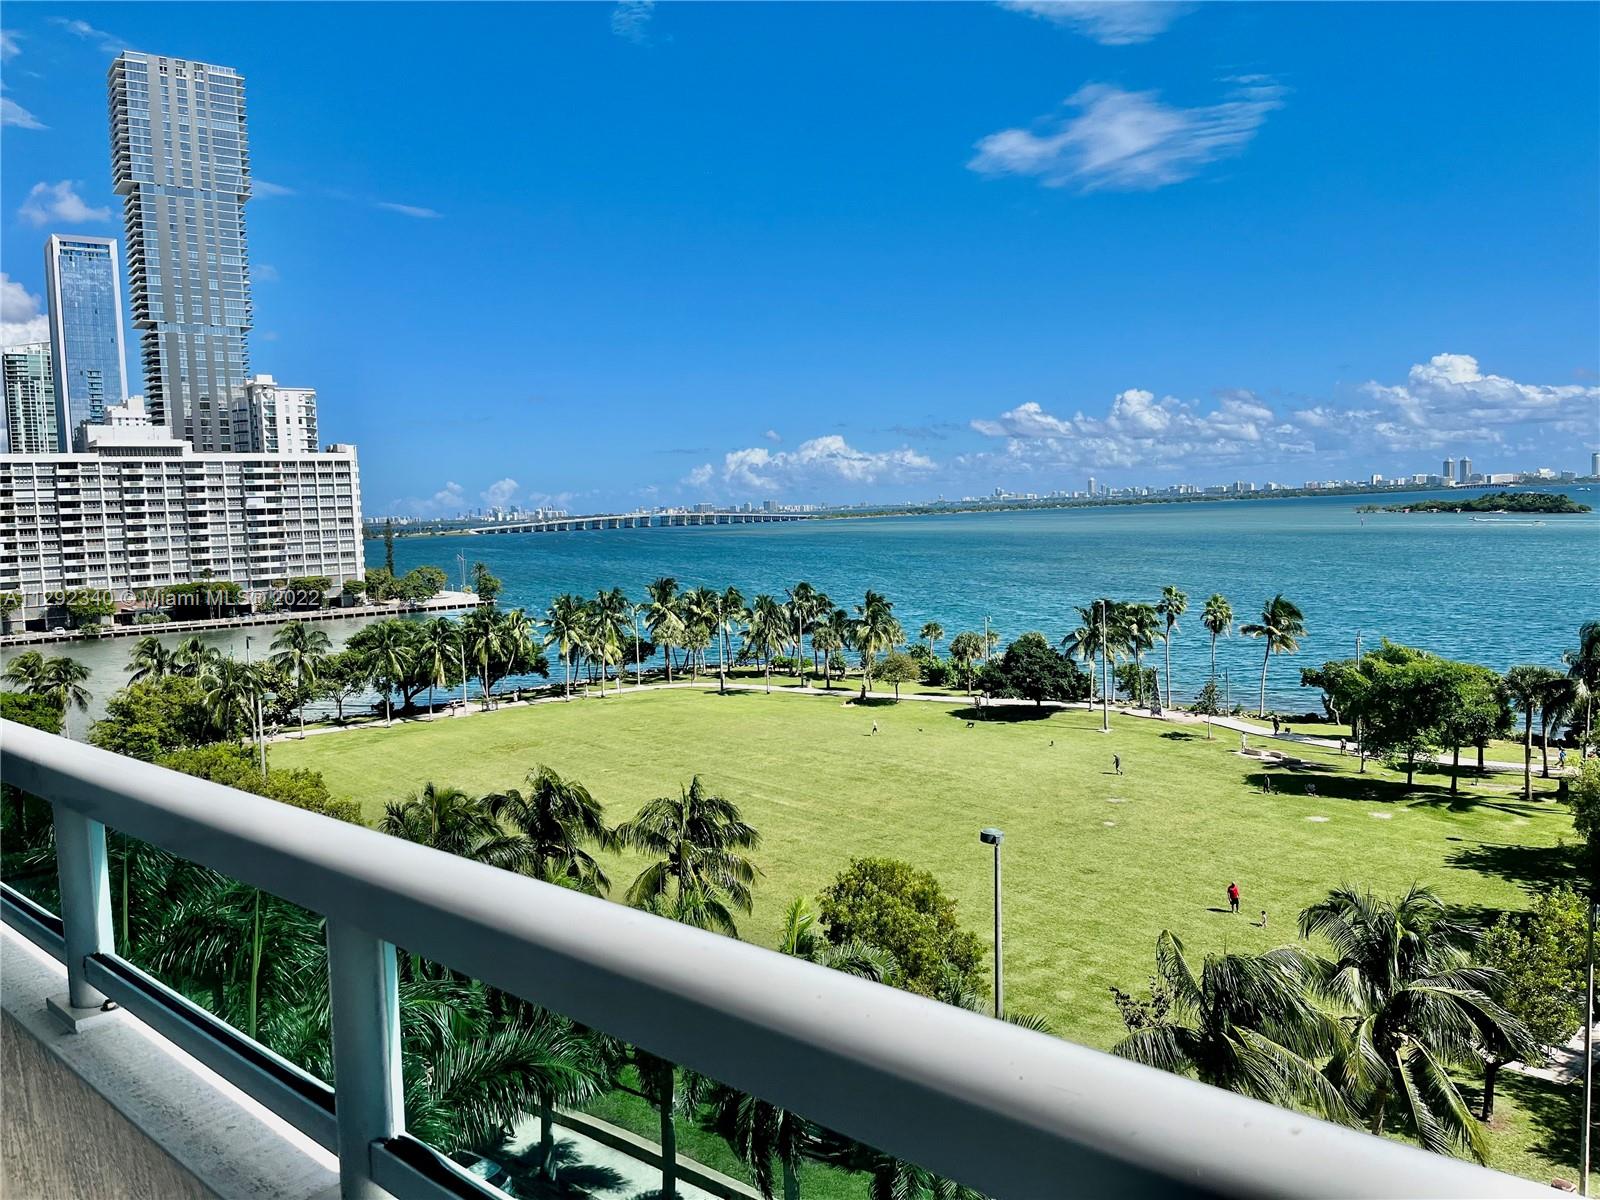 COME LIVE IN THE HEART OF HOTTEST AREA IN URBAN MIAMI-EDGEWATER! BEAUTIFUL/SPECTACULAR WIDE DIRECT EAST BAY & PARK VIEWS.HIGH CEILINGS.OPEN KITCHEN W/GRANITE & STAINLESS.SPLIT BEDROOMS.FLOOR TO CEILING WINDOWS IN THE LIV/DIN AREA.MARBLE FLOORS.4 CLOSETS.1154 OF AC SPACE+232SQFT IN TERRACE.STORAGE & PARKING SPACE IN THE SAME FLOOR.CABLE, HIGH-SPEED INTERNET, WATER & 1 PARKING SPACE(MORE AVAILABLE FOR +) INCLUDED IN LOW HOA.WALK TO PARK,CAFES,NIGHTLIFE,BARS,RESTAURANTS,PUBLIX,BANKS,SHOPS, MUSEUMS,THE AAA, THE PERFORMING ARTS CENTER, WYNWOOD & SO MUCH MORE.5 MINUTES TO EVERYTHING;SOUTH BEACH, DOWNTOWN, BRICKELL, AAA, PERFORMING ARTS CENTER,THE PORT & HEALTH DISTRICT.EASY ACCESS TO ALL MAJOR HIGHWAYS.EASY TO SHOW CALL NOW!!!!!!!!!!!!